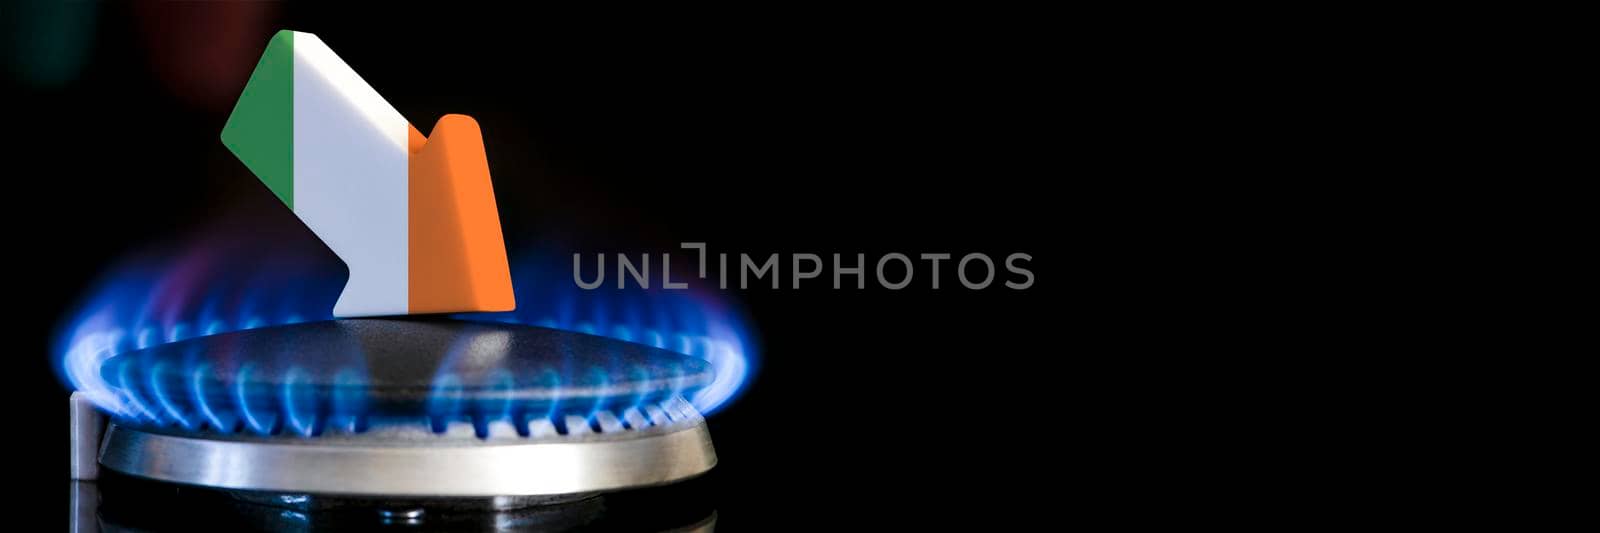 Decreased gas supplies in Ireland. A gas stove with a burning flame and an arrow in the colors of the Ireland flag pointing down. Concept of crisis in winter and lack of natural gas. Heating season